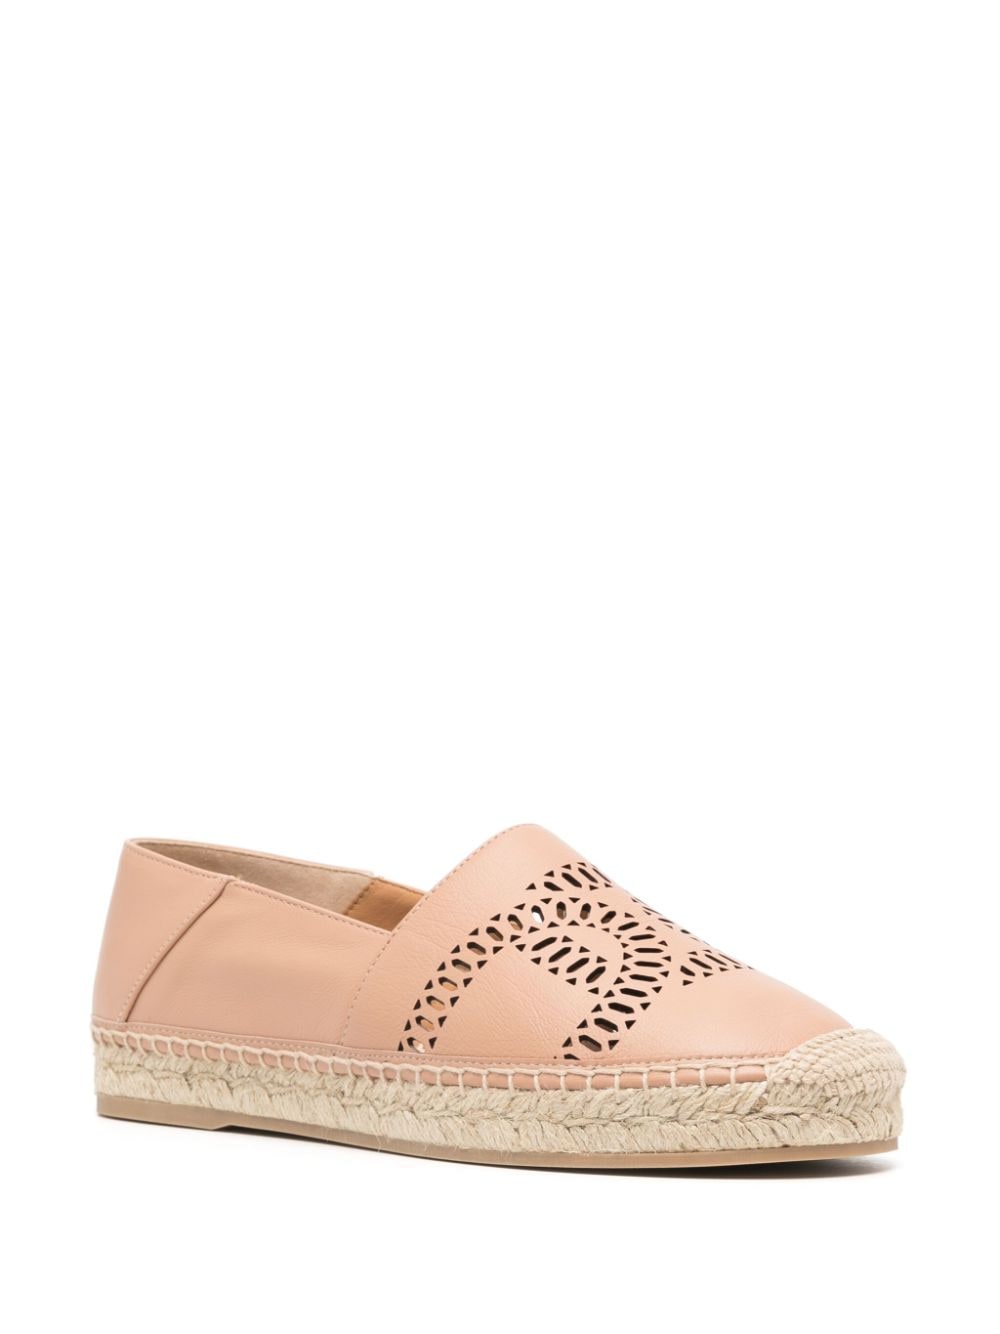 Tod's Kate leather espadrilles - Beige